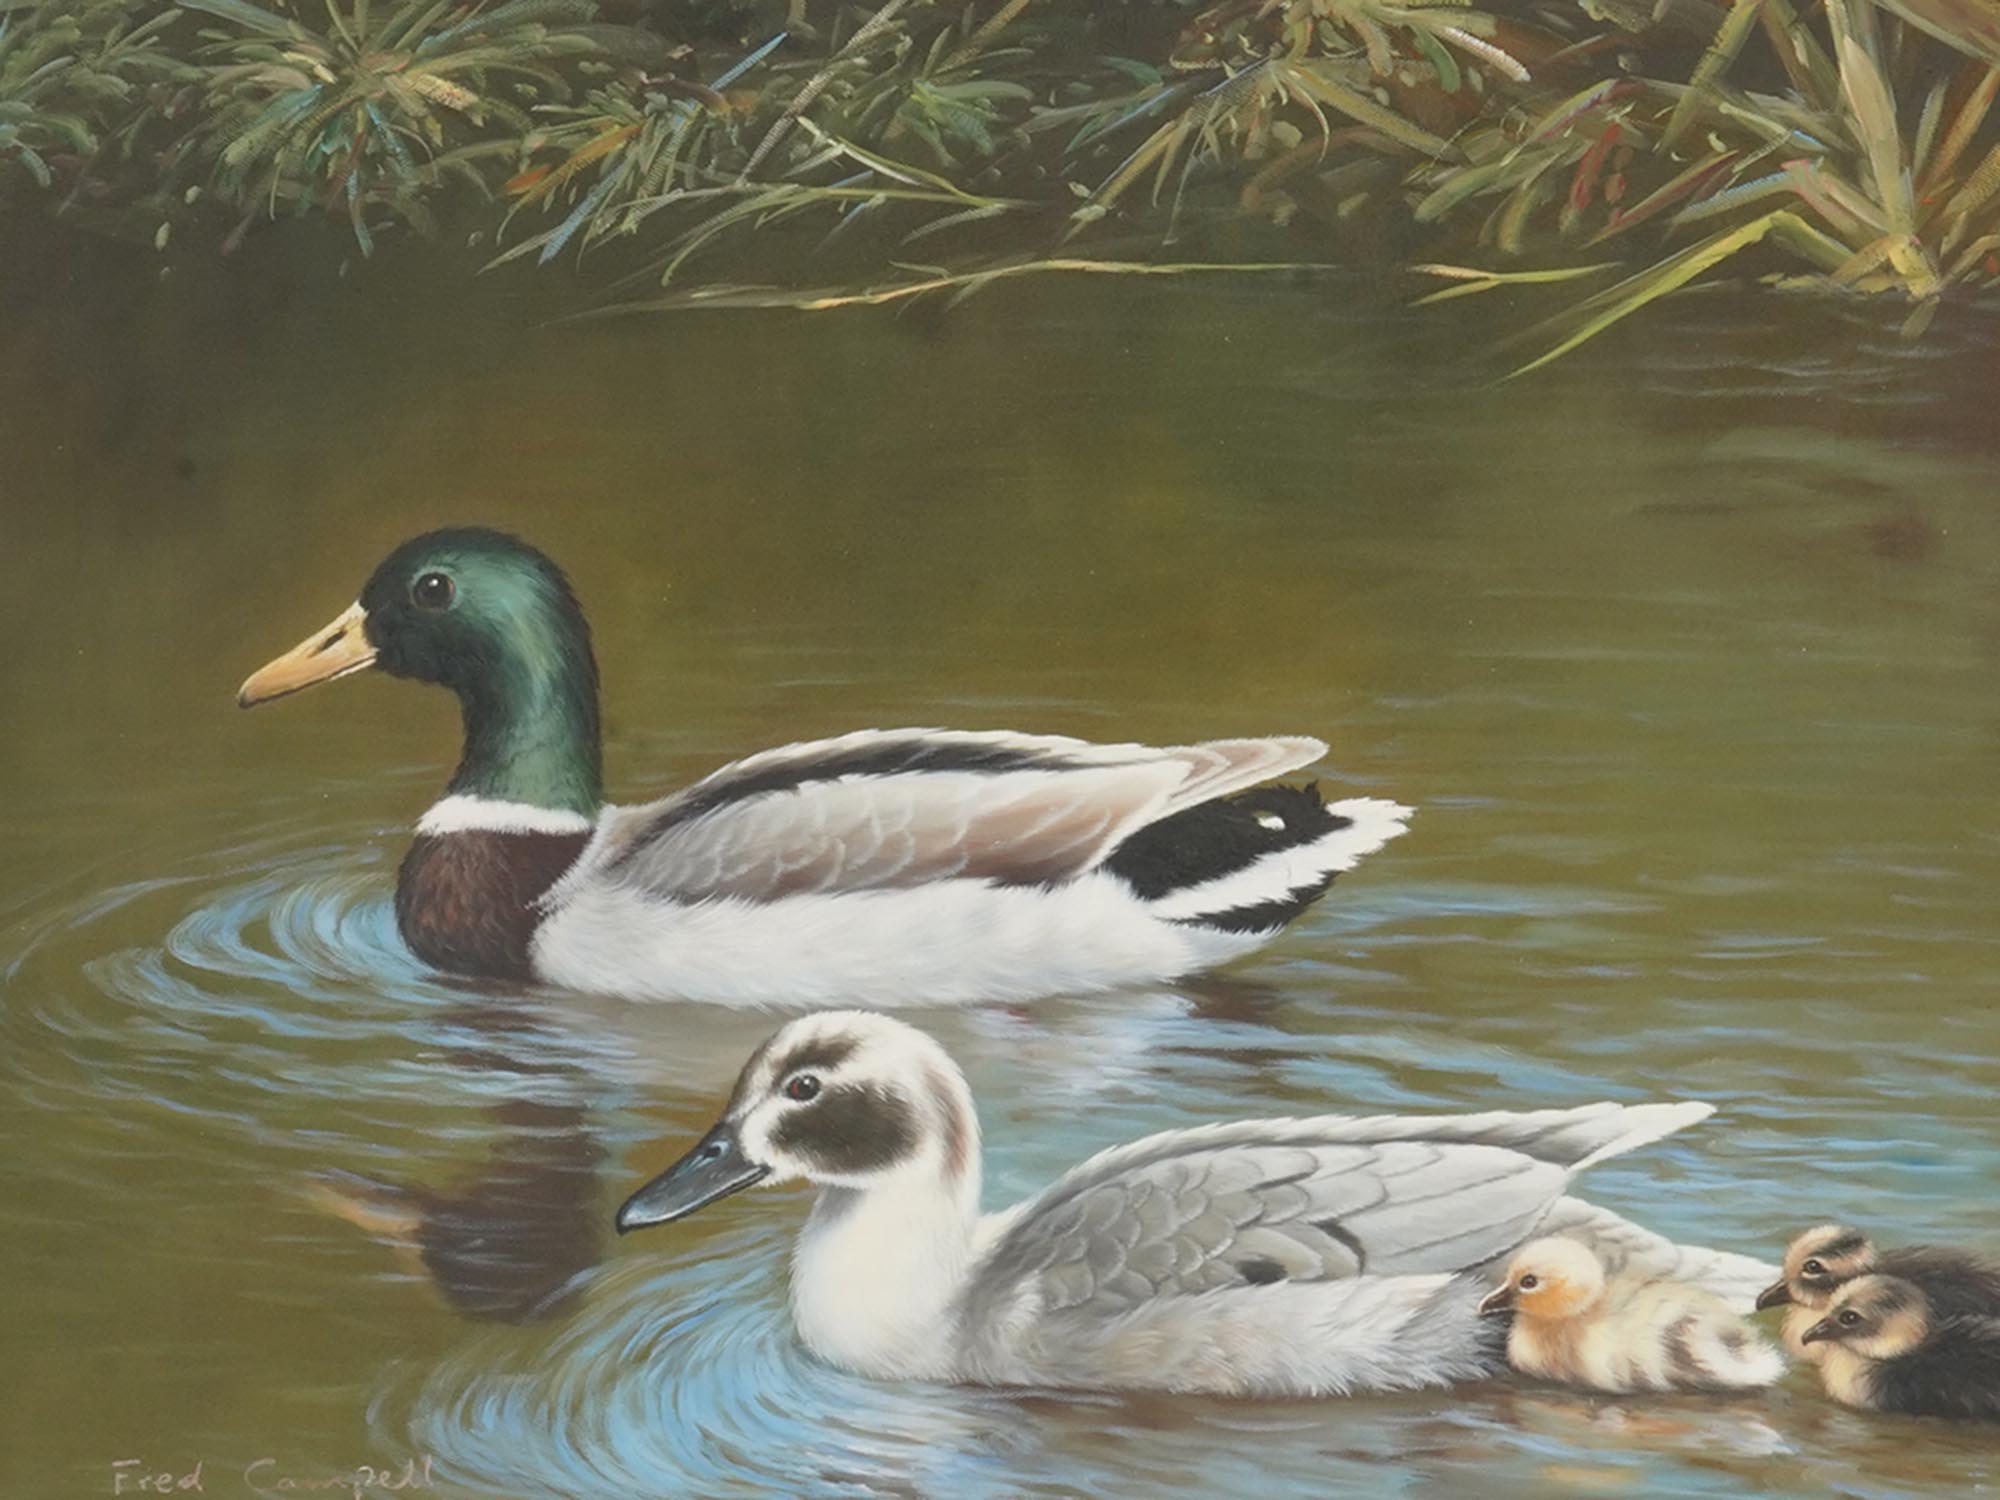 FRAMED OIL PAINTING OF DUCKS SIGNED FRED CAMPELL PIC-1